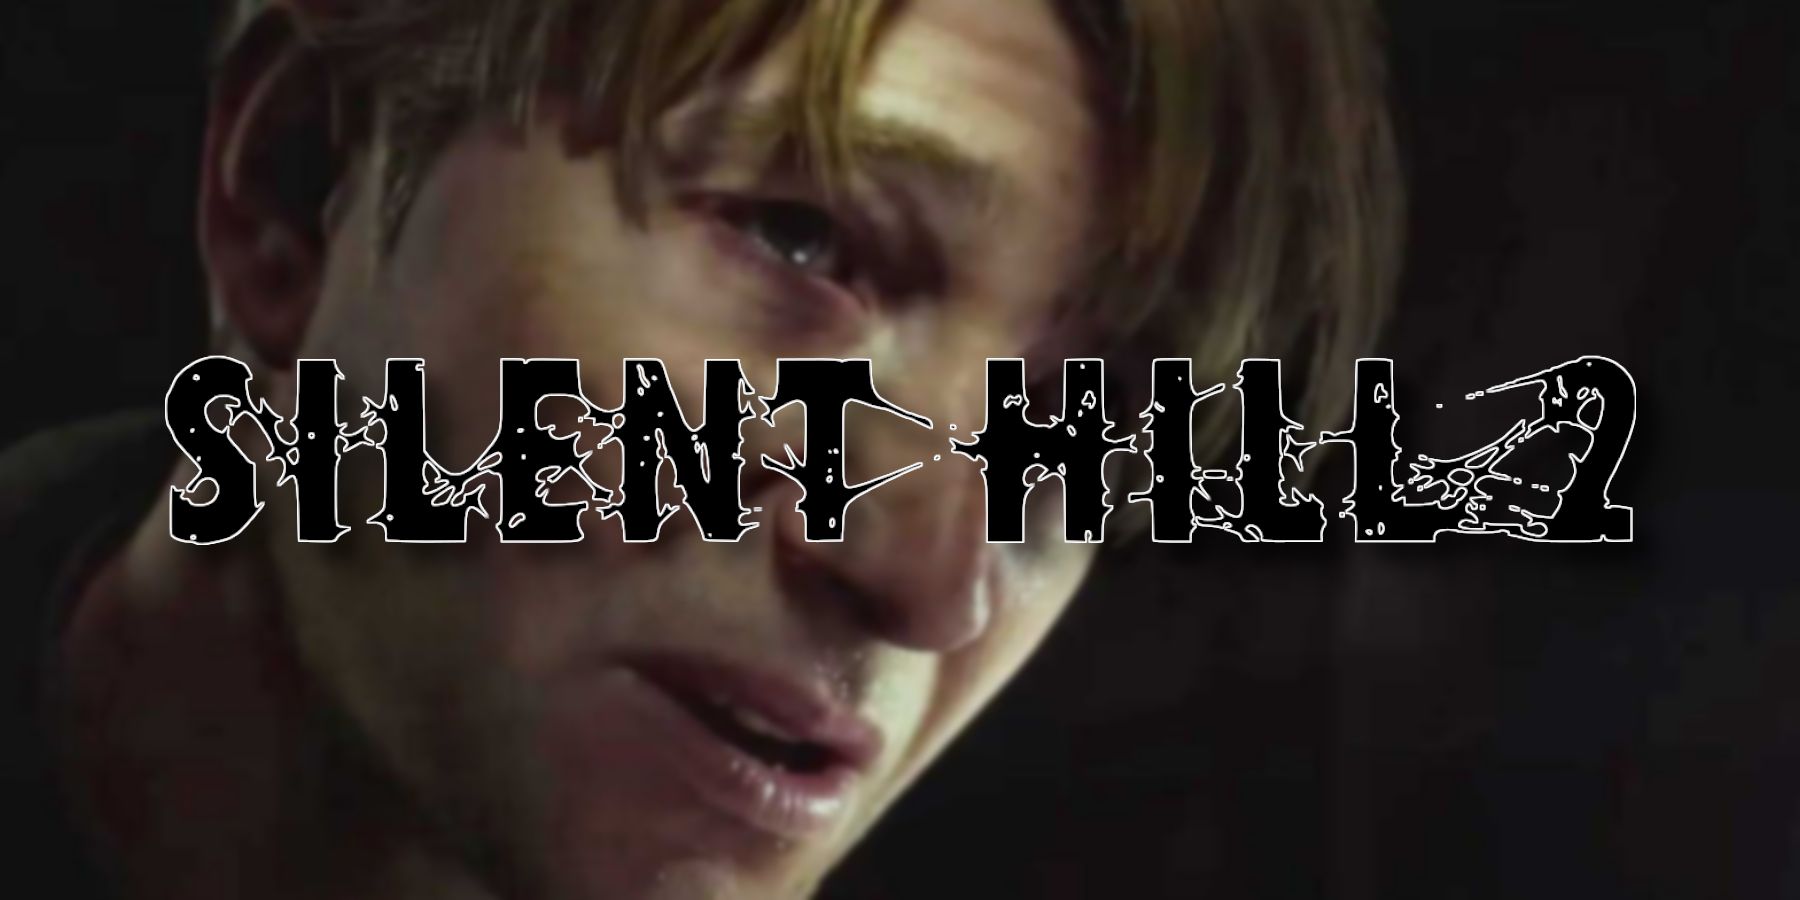 Silent Hill 2 logo with a close-up of James Sunderland from the remake behind it.